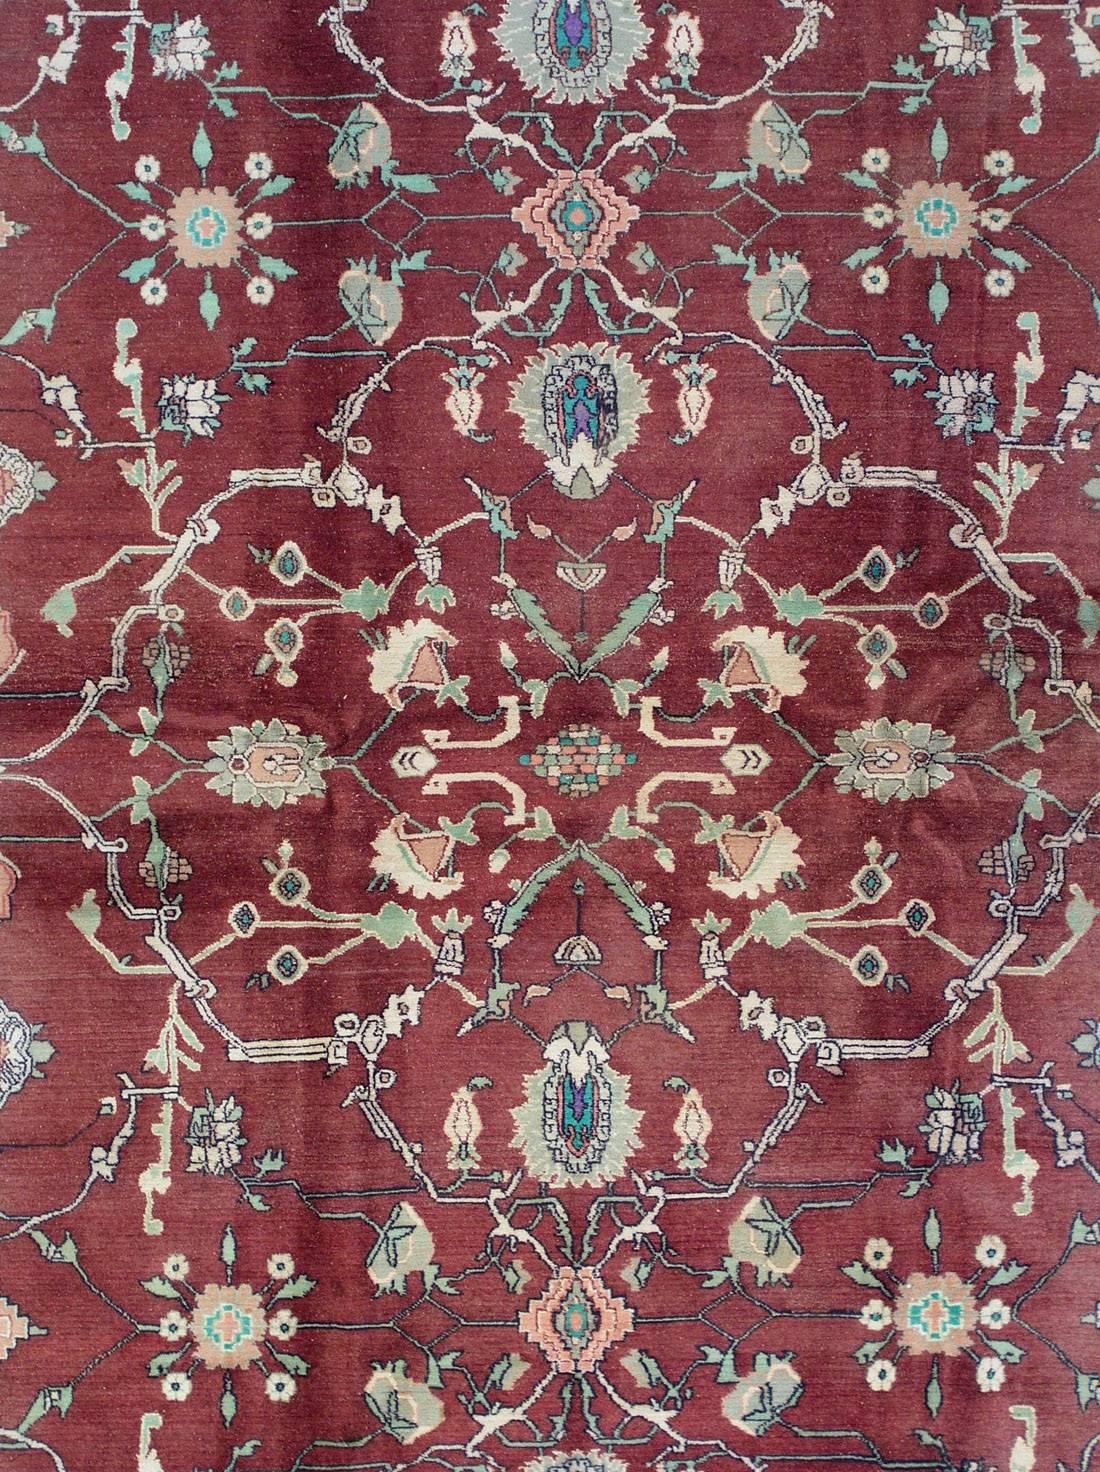 Fine Antique Indian Agra rug

circa 1900

5' 10'' x 8' 9''

Hand-knotted wool pile, cotton foundation

Field Color: Burgundy
Border Color: Cream